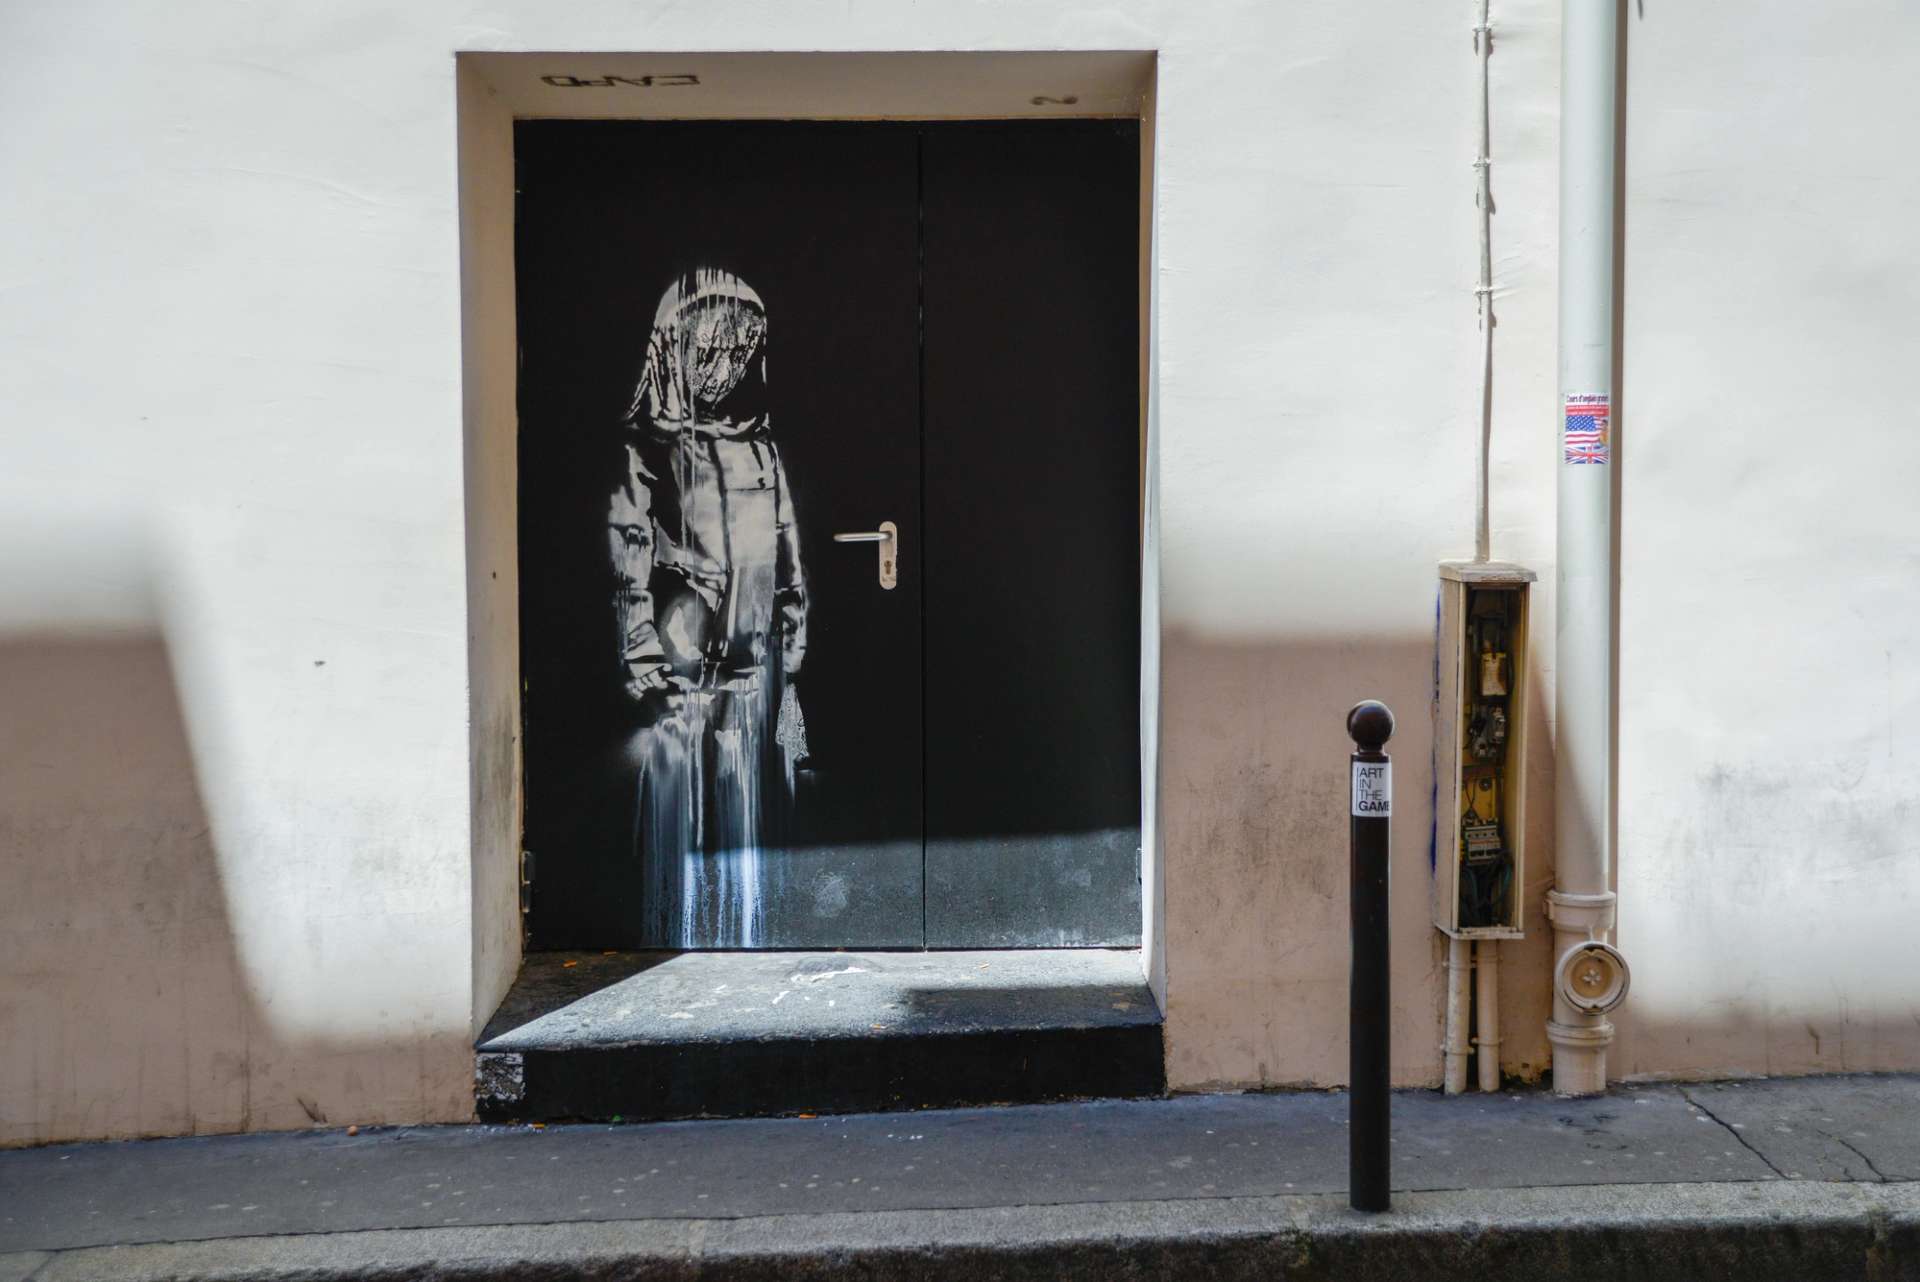 Mural For Bataclan Victims by Banksy